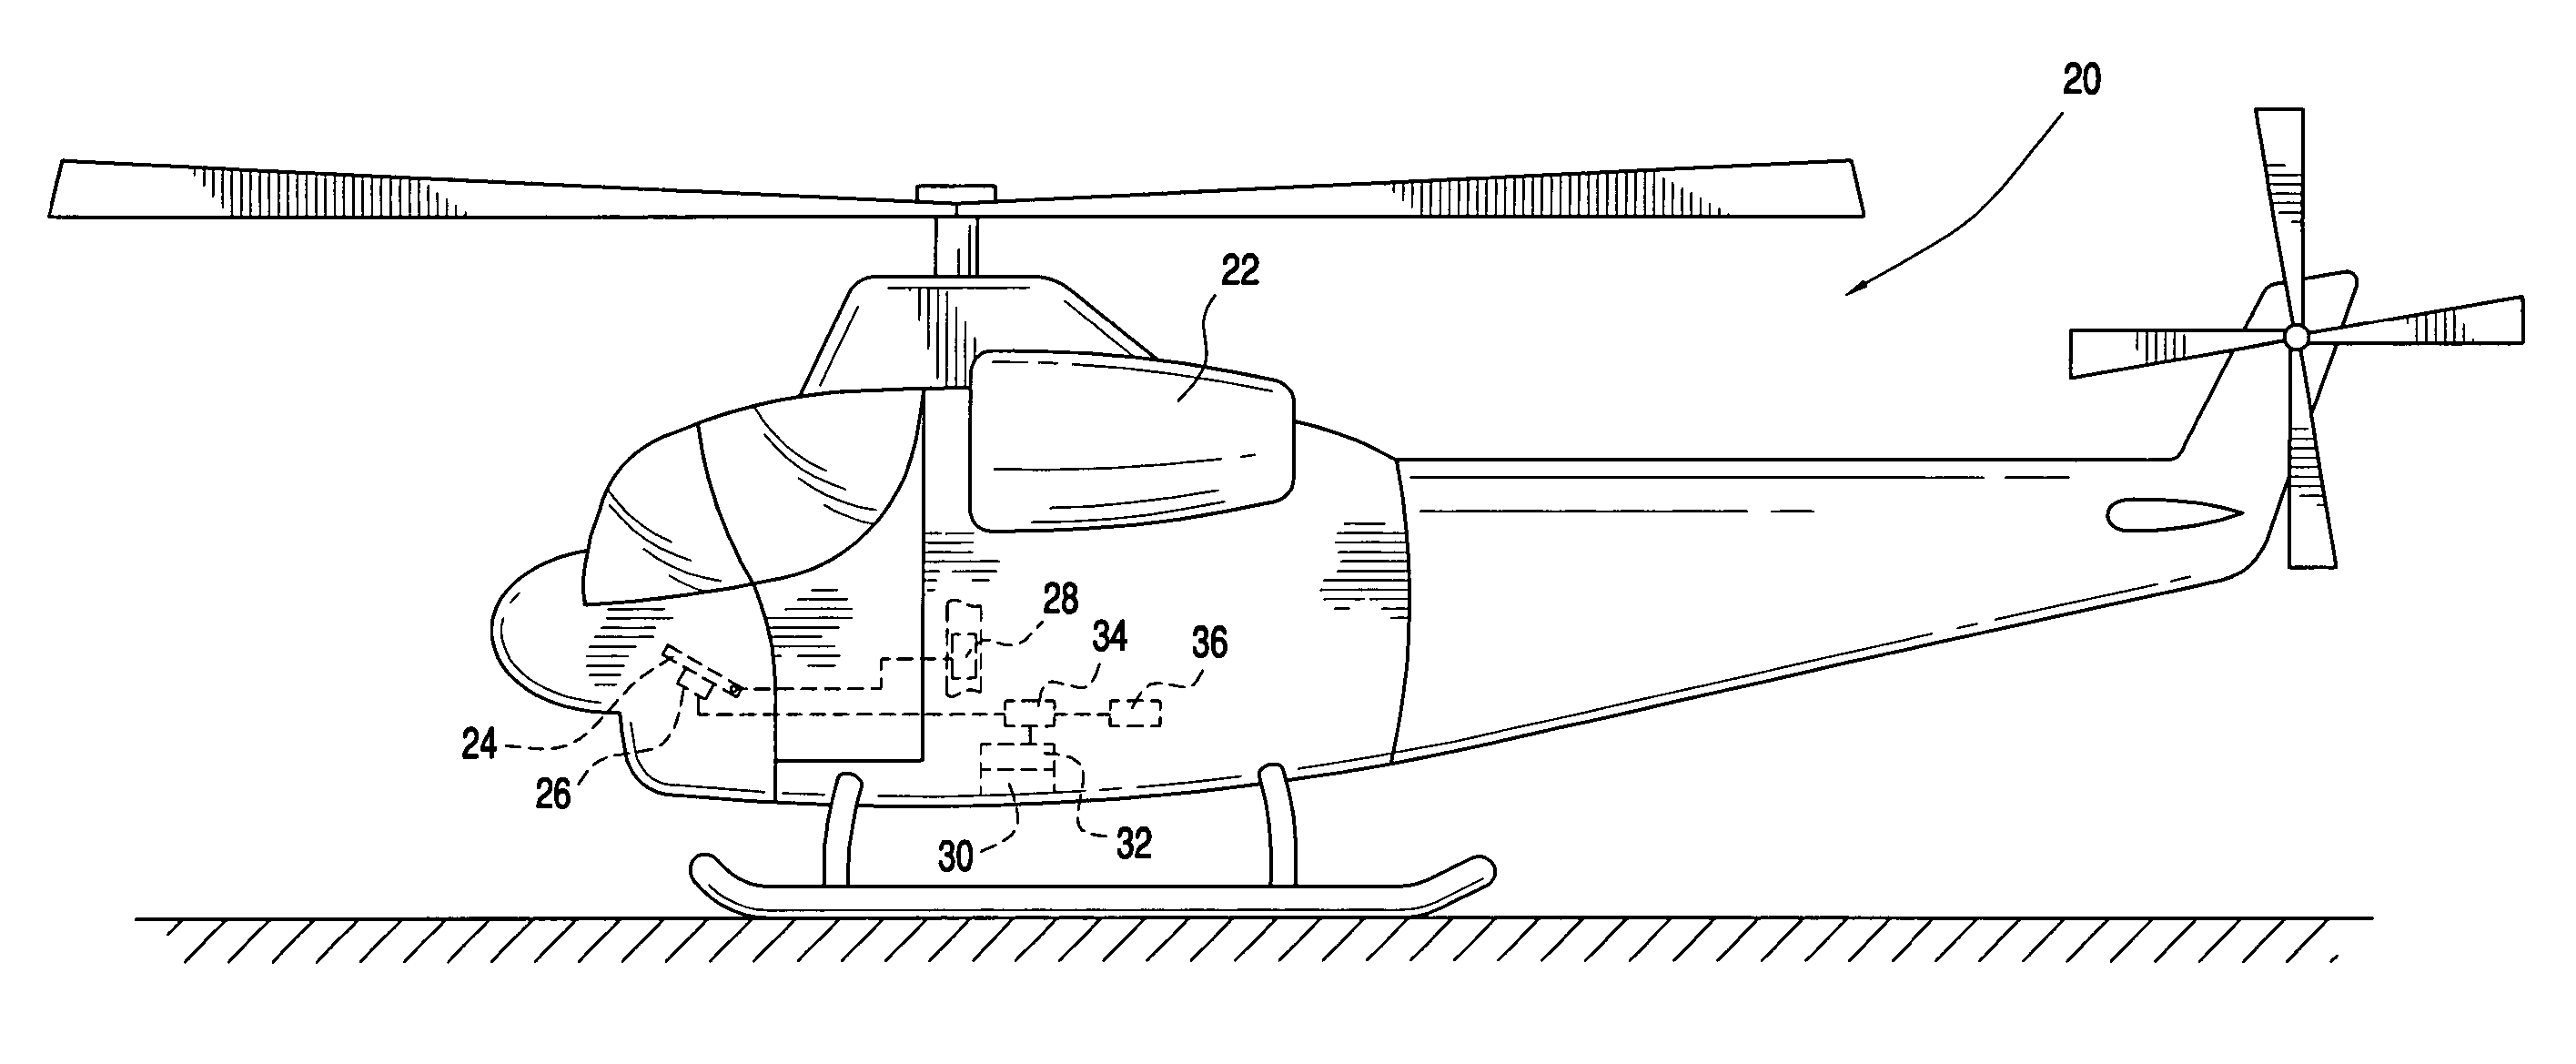 Tactile cueing system and method for aiding a helicopter pilot in making landings